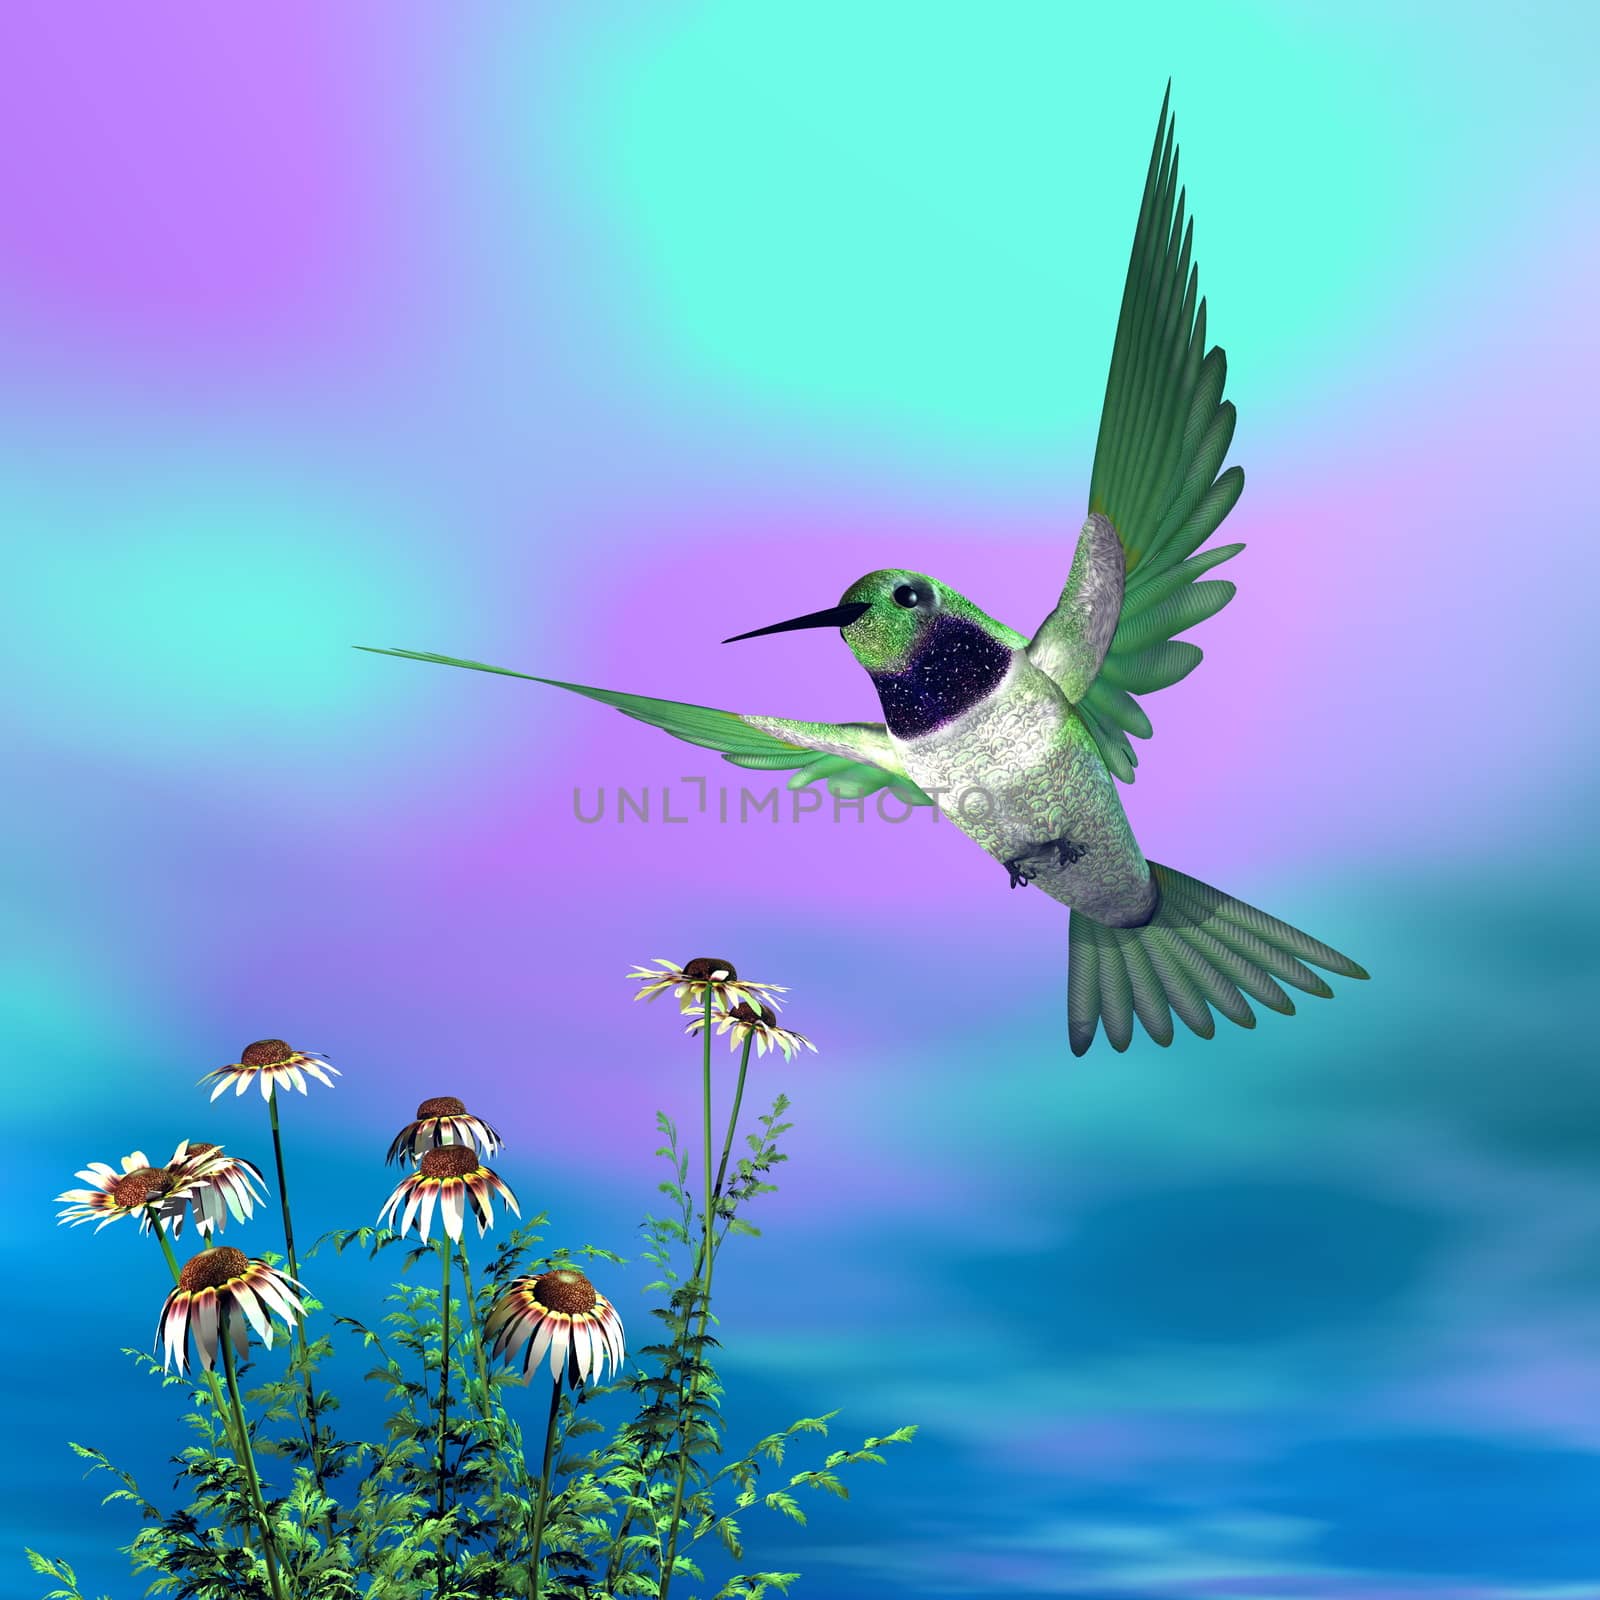 Black-chinned hummingbird flying upon white daisies - 3D render